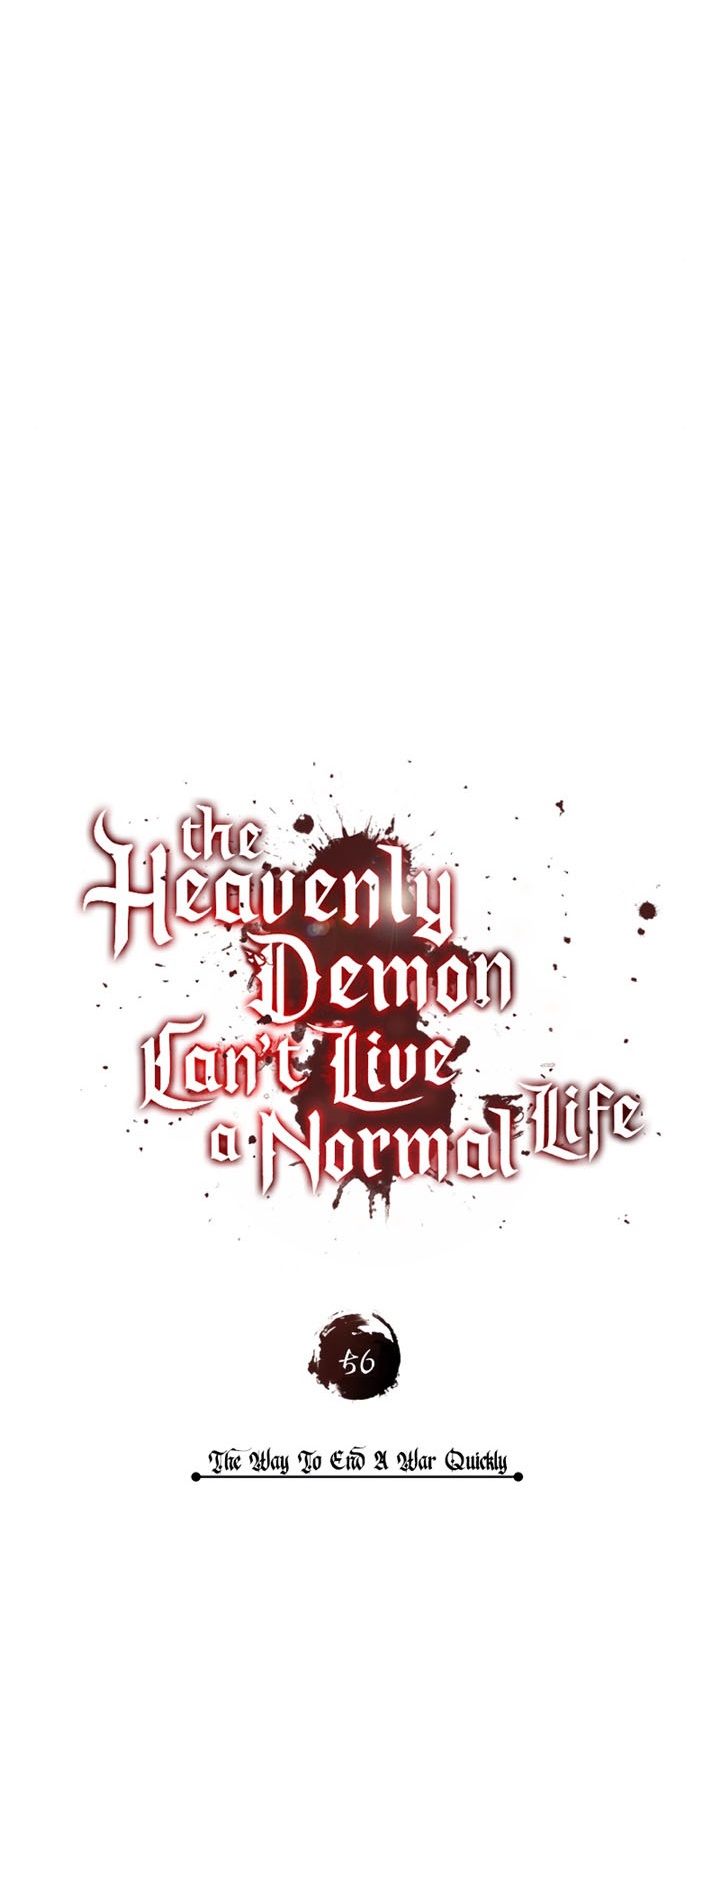 The Heavenly Demon Can’t Live a Normal Life 56 (9)